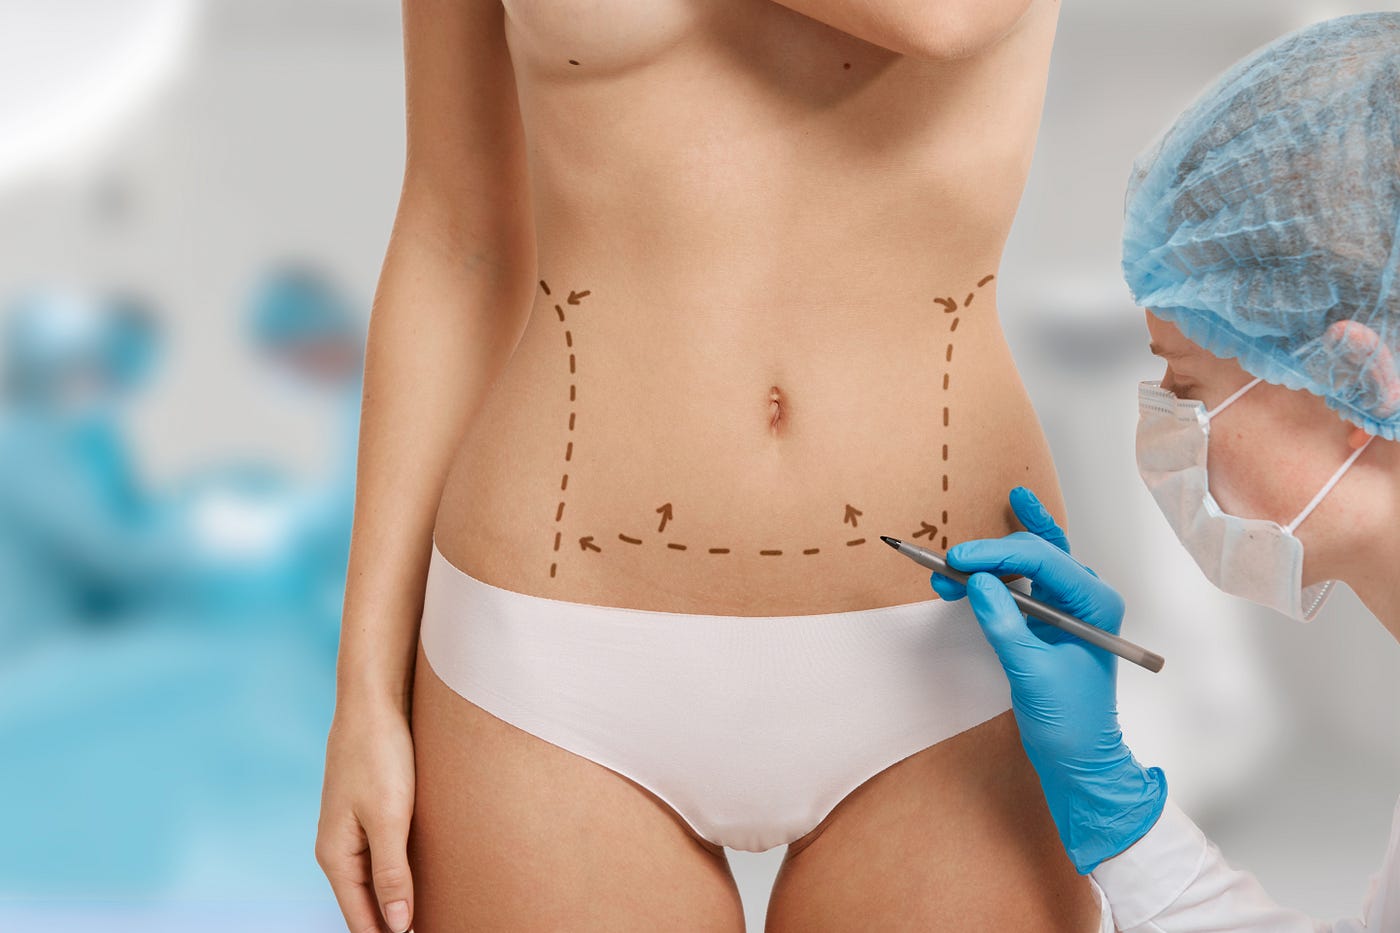 Sculpt Plastic Surgery: A Guide to Body Contouring, by WellnessWanderer